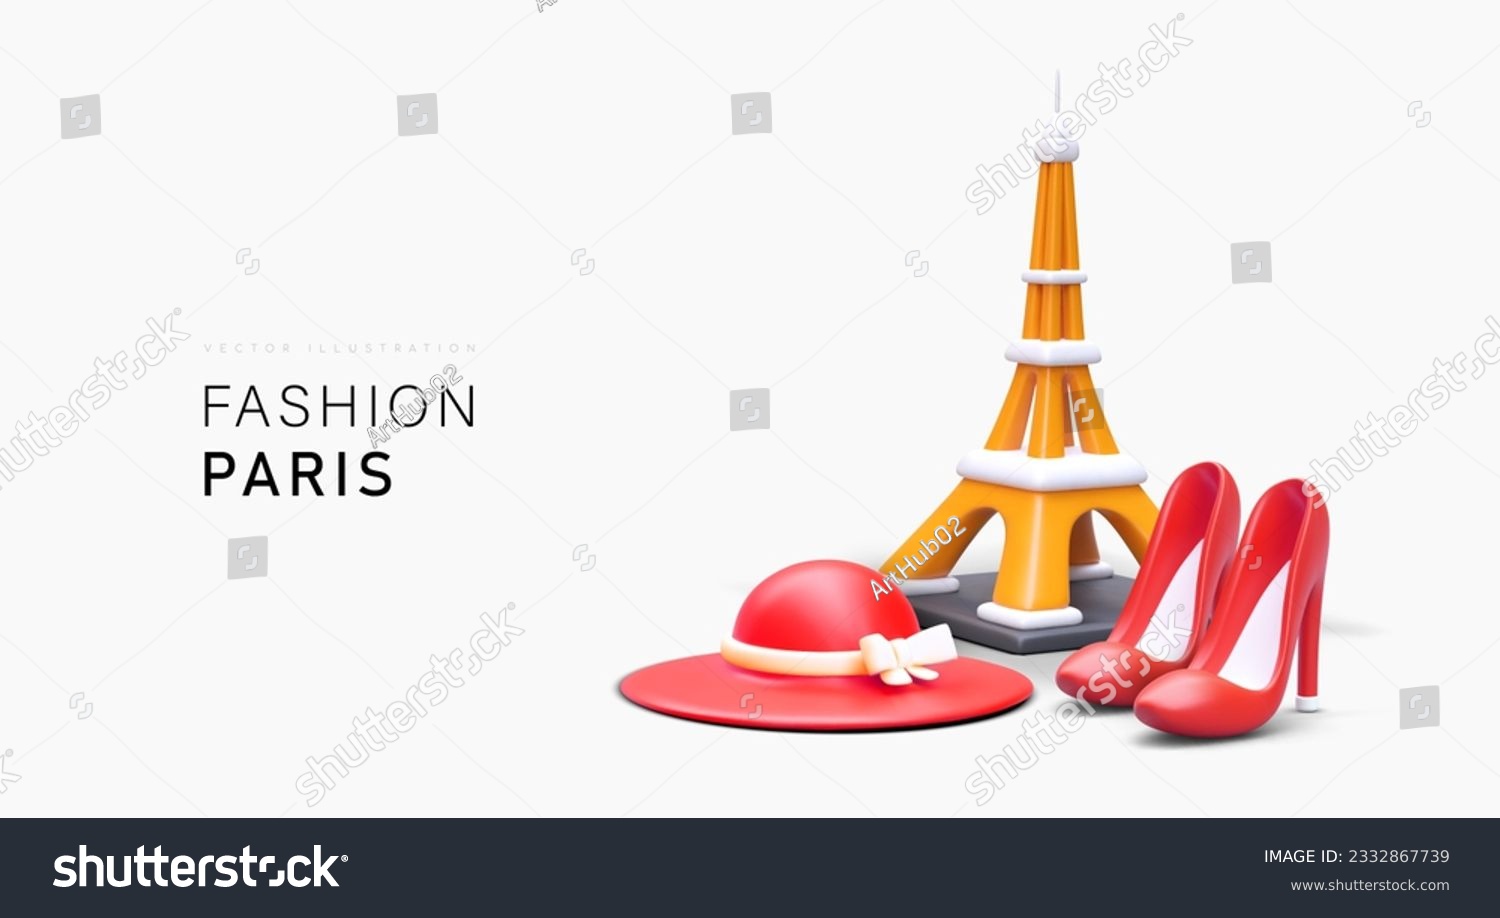 Fashion Paris. Realistic Eiffel Tower, hat, high heels. Color advertising of shopping tours in capital of France. Vacations with visits to fashion shows, boutiques, and shops #2332867739